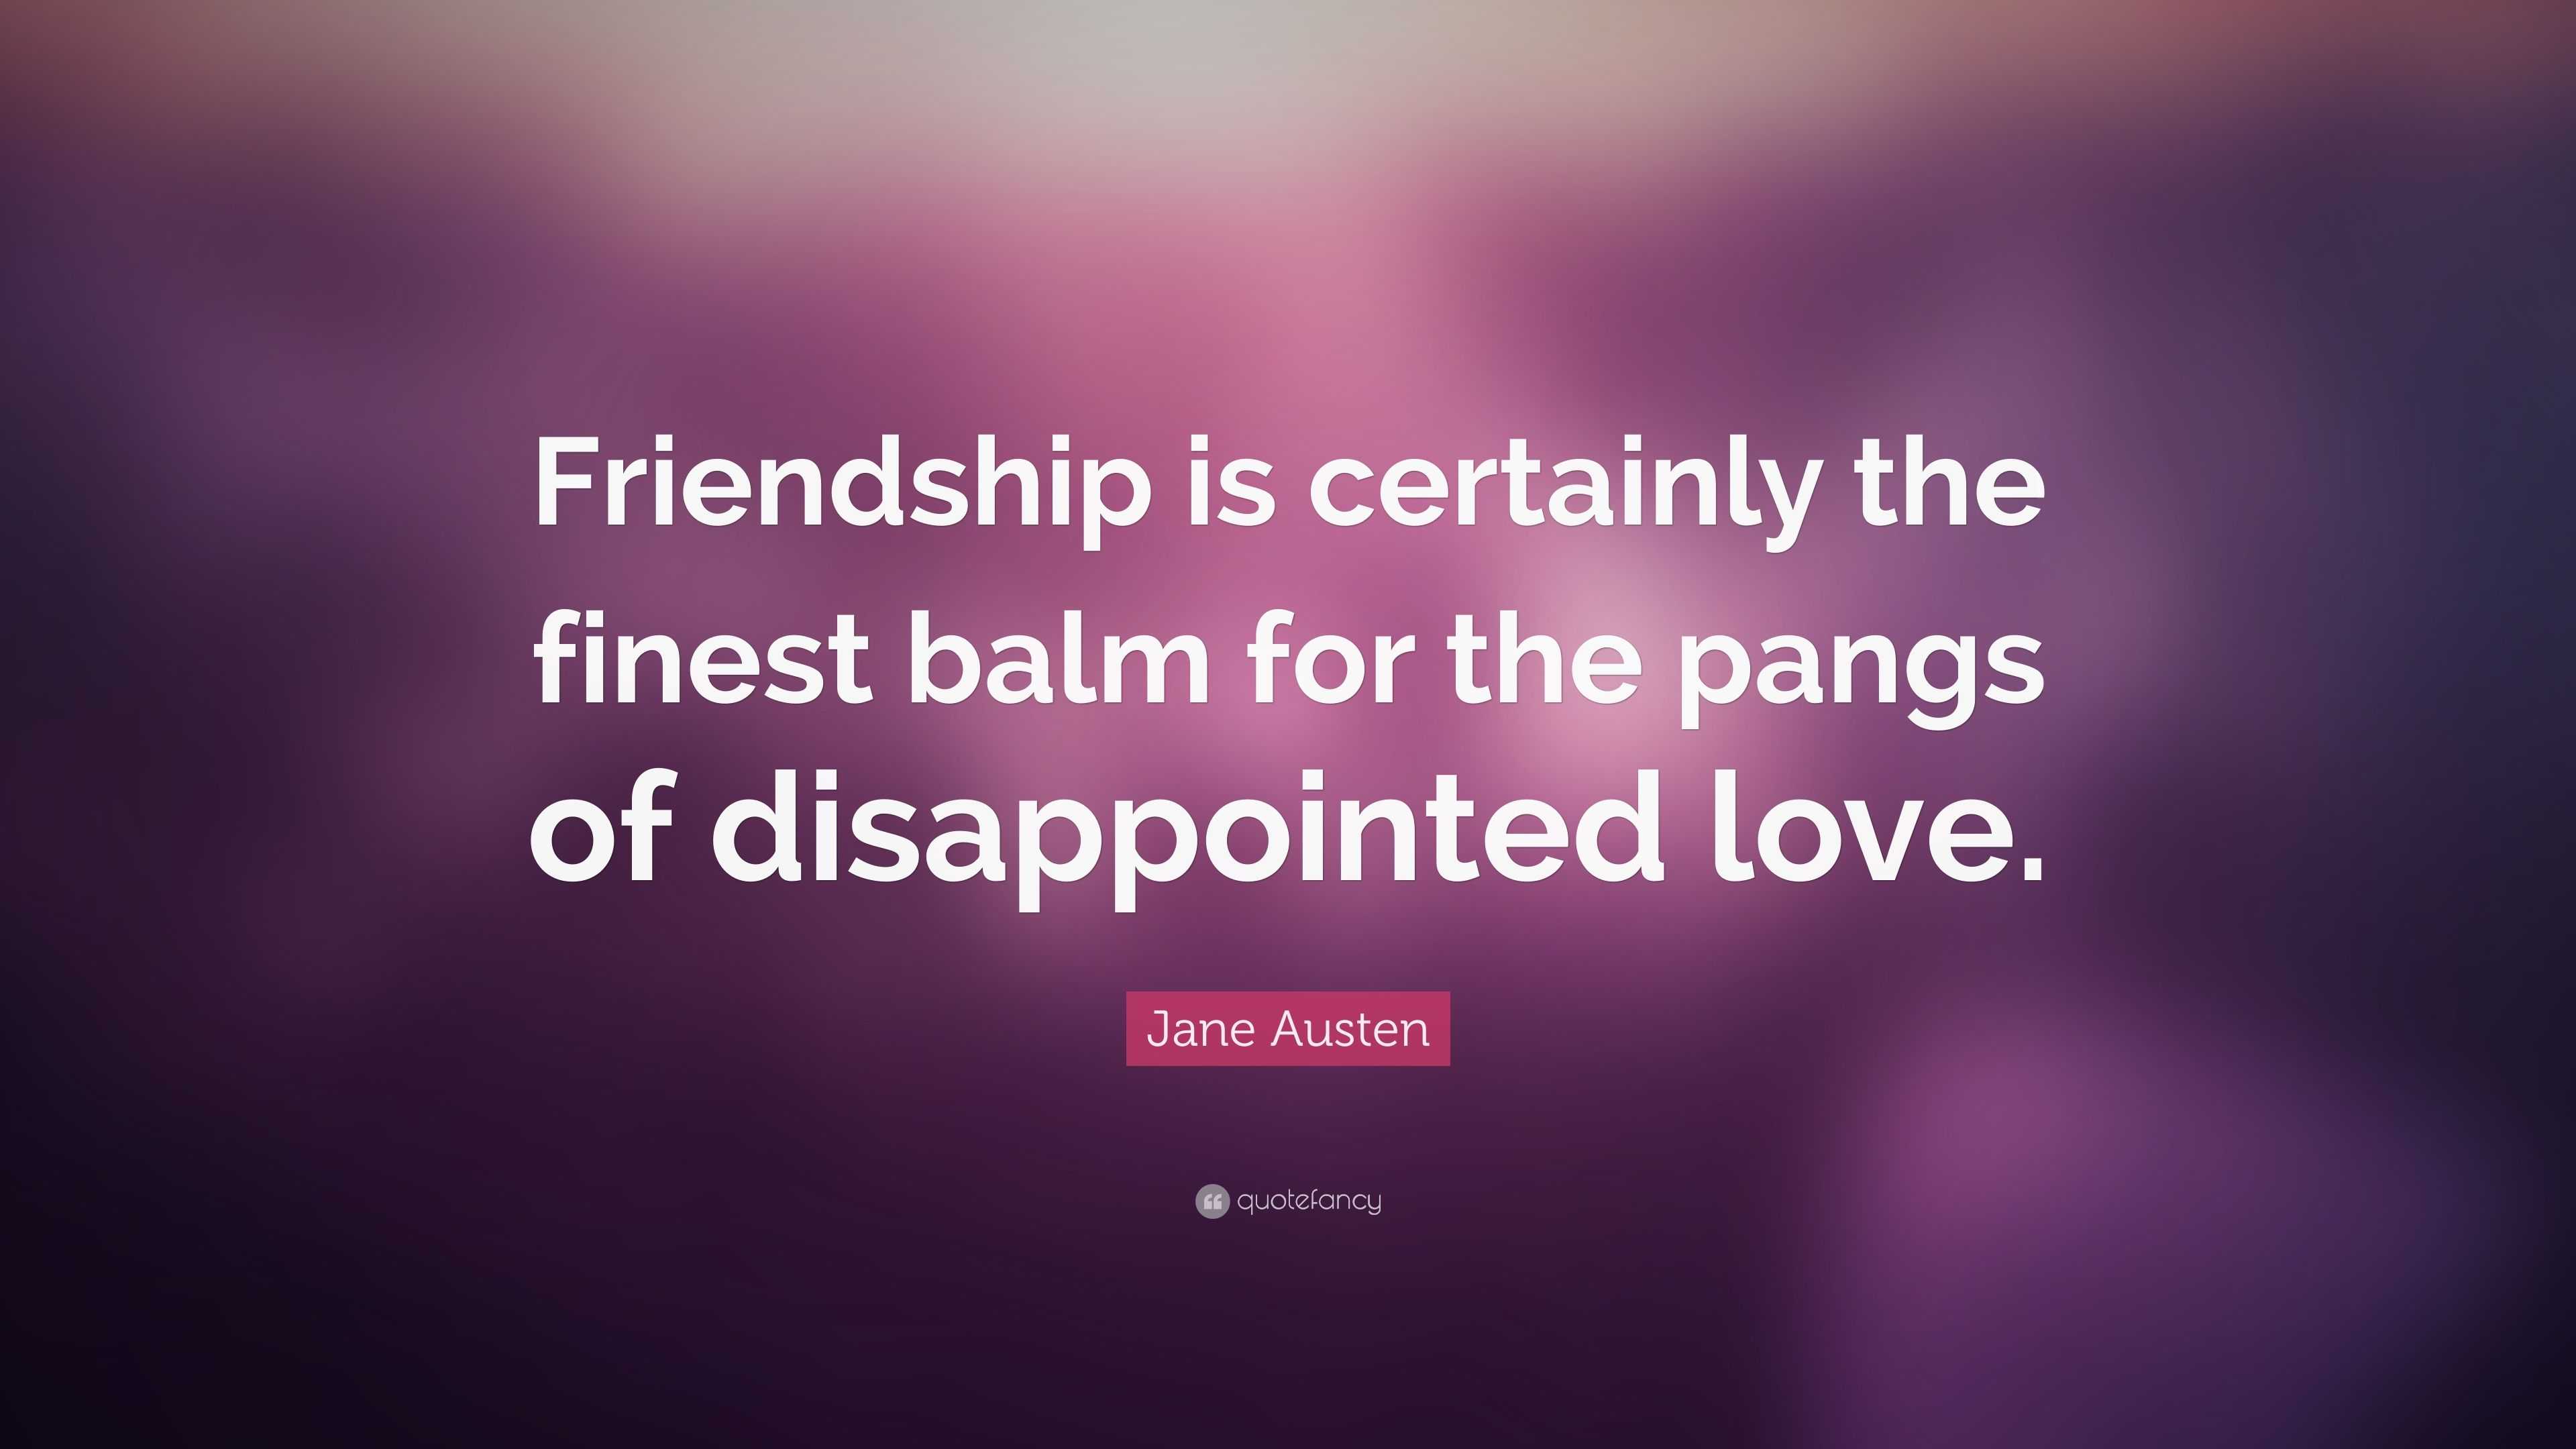 Jane Austen Quote “Friendship is certainly the finest balm for the pangs of disappointed